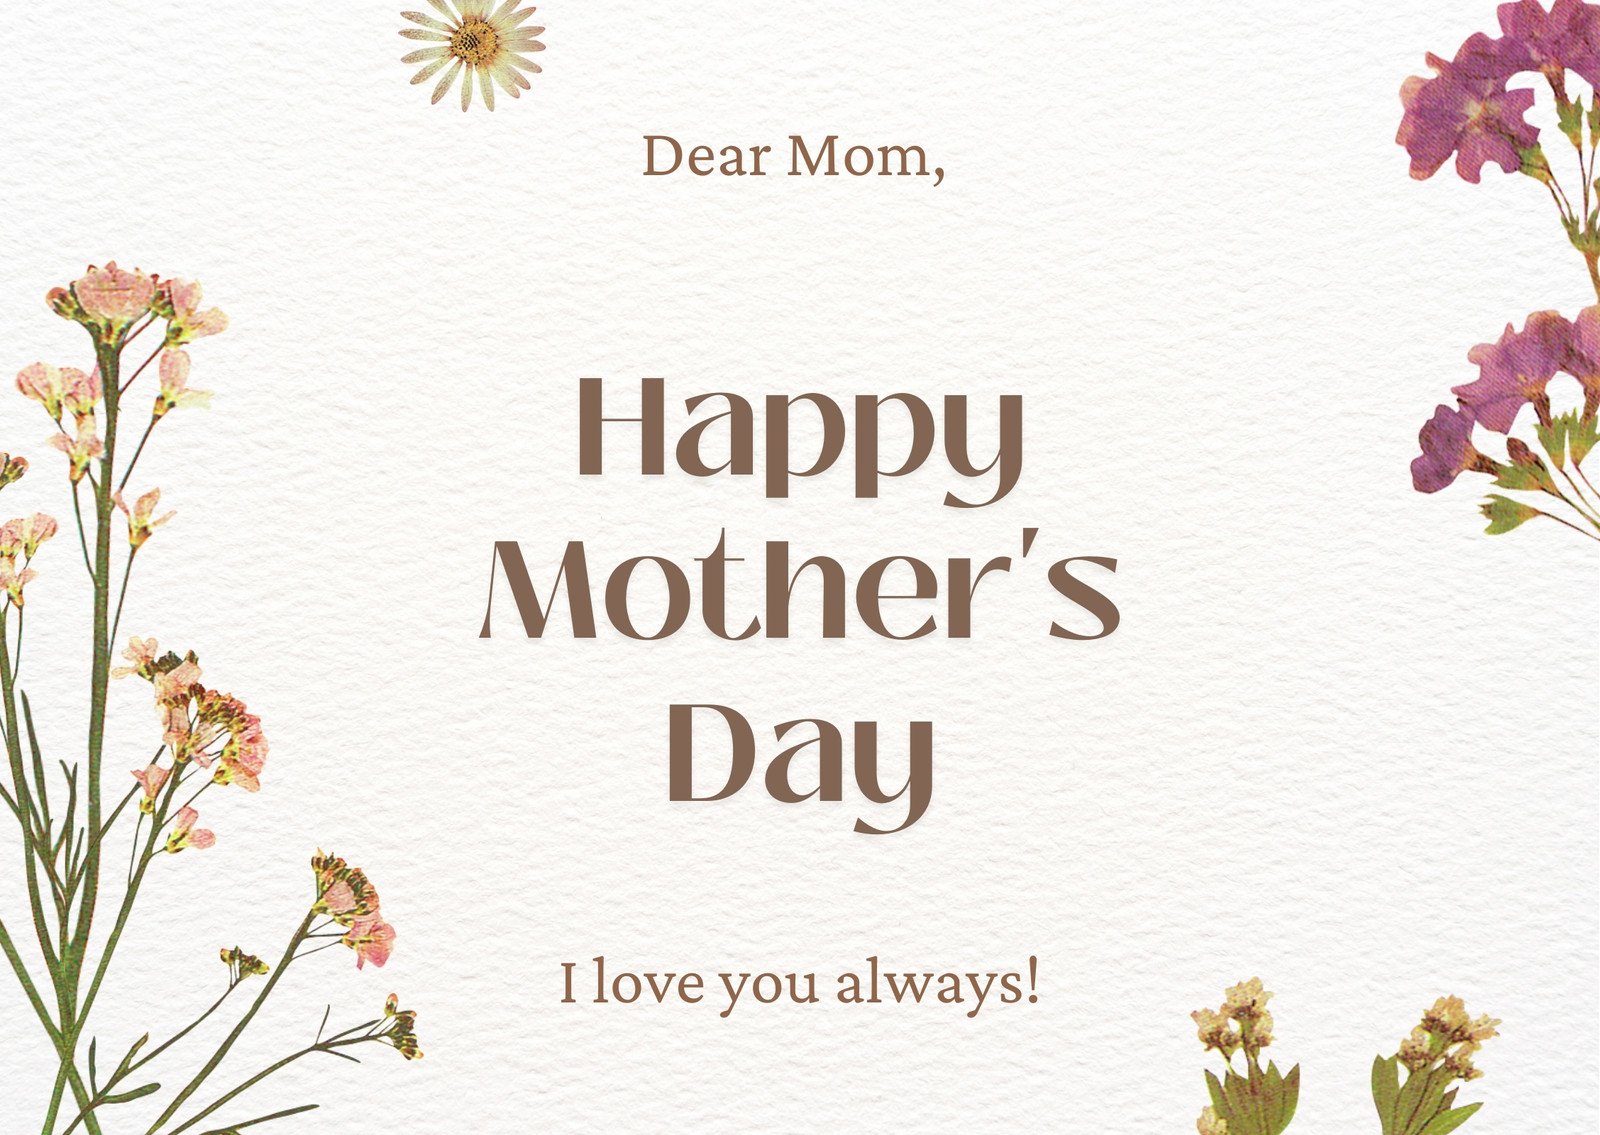 Brown and White Cute Floral Pattern Mother's Day Card